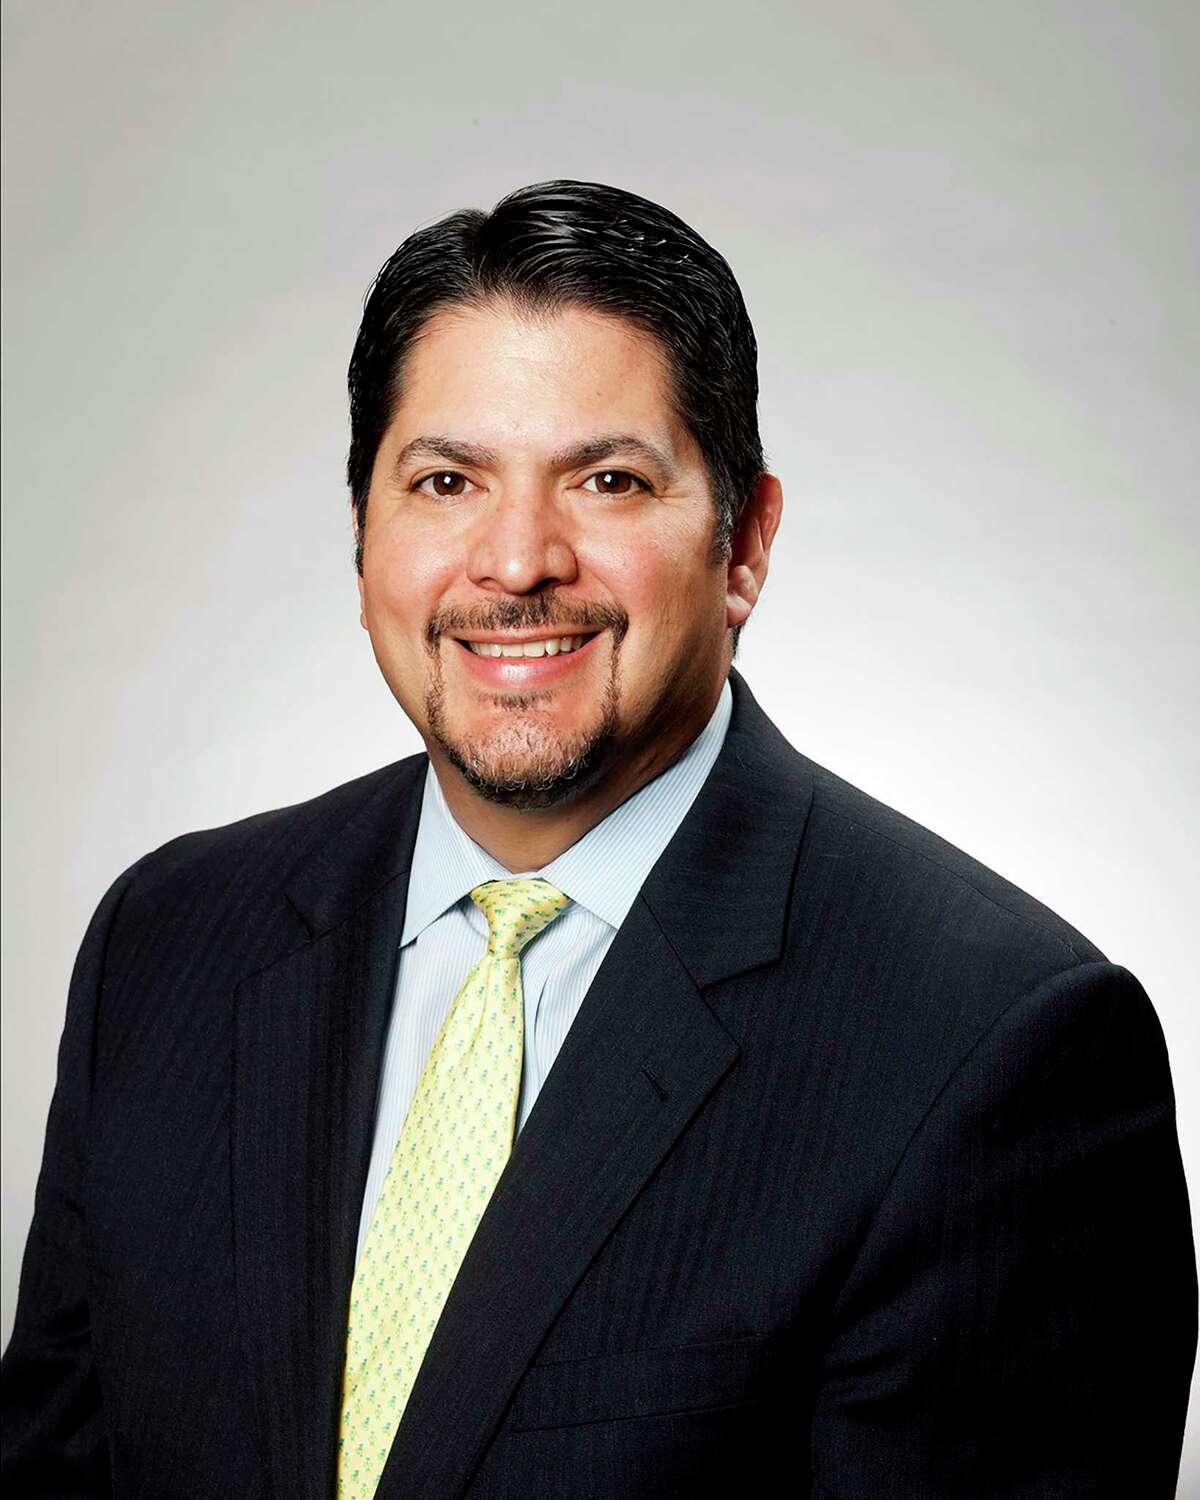 Rudy Garza, 48, will be interim CEO of CPS Energy when Paula Gold-Williams steps down.